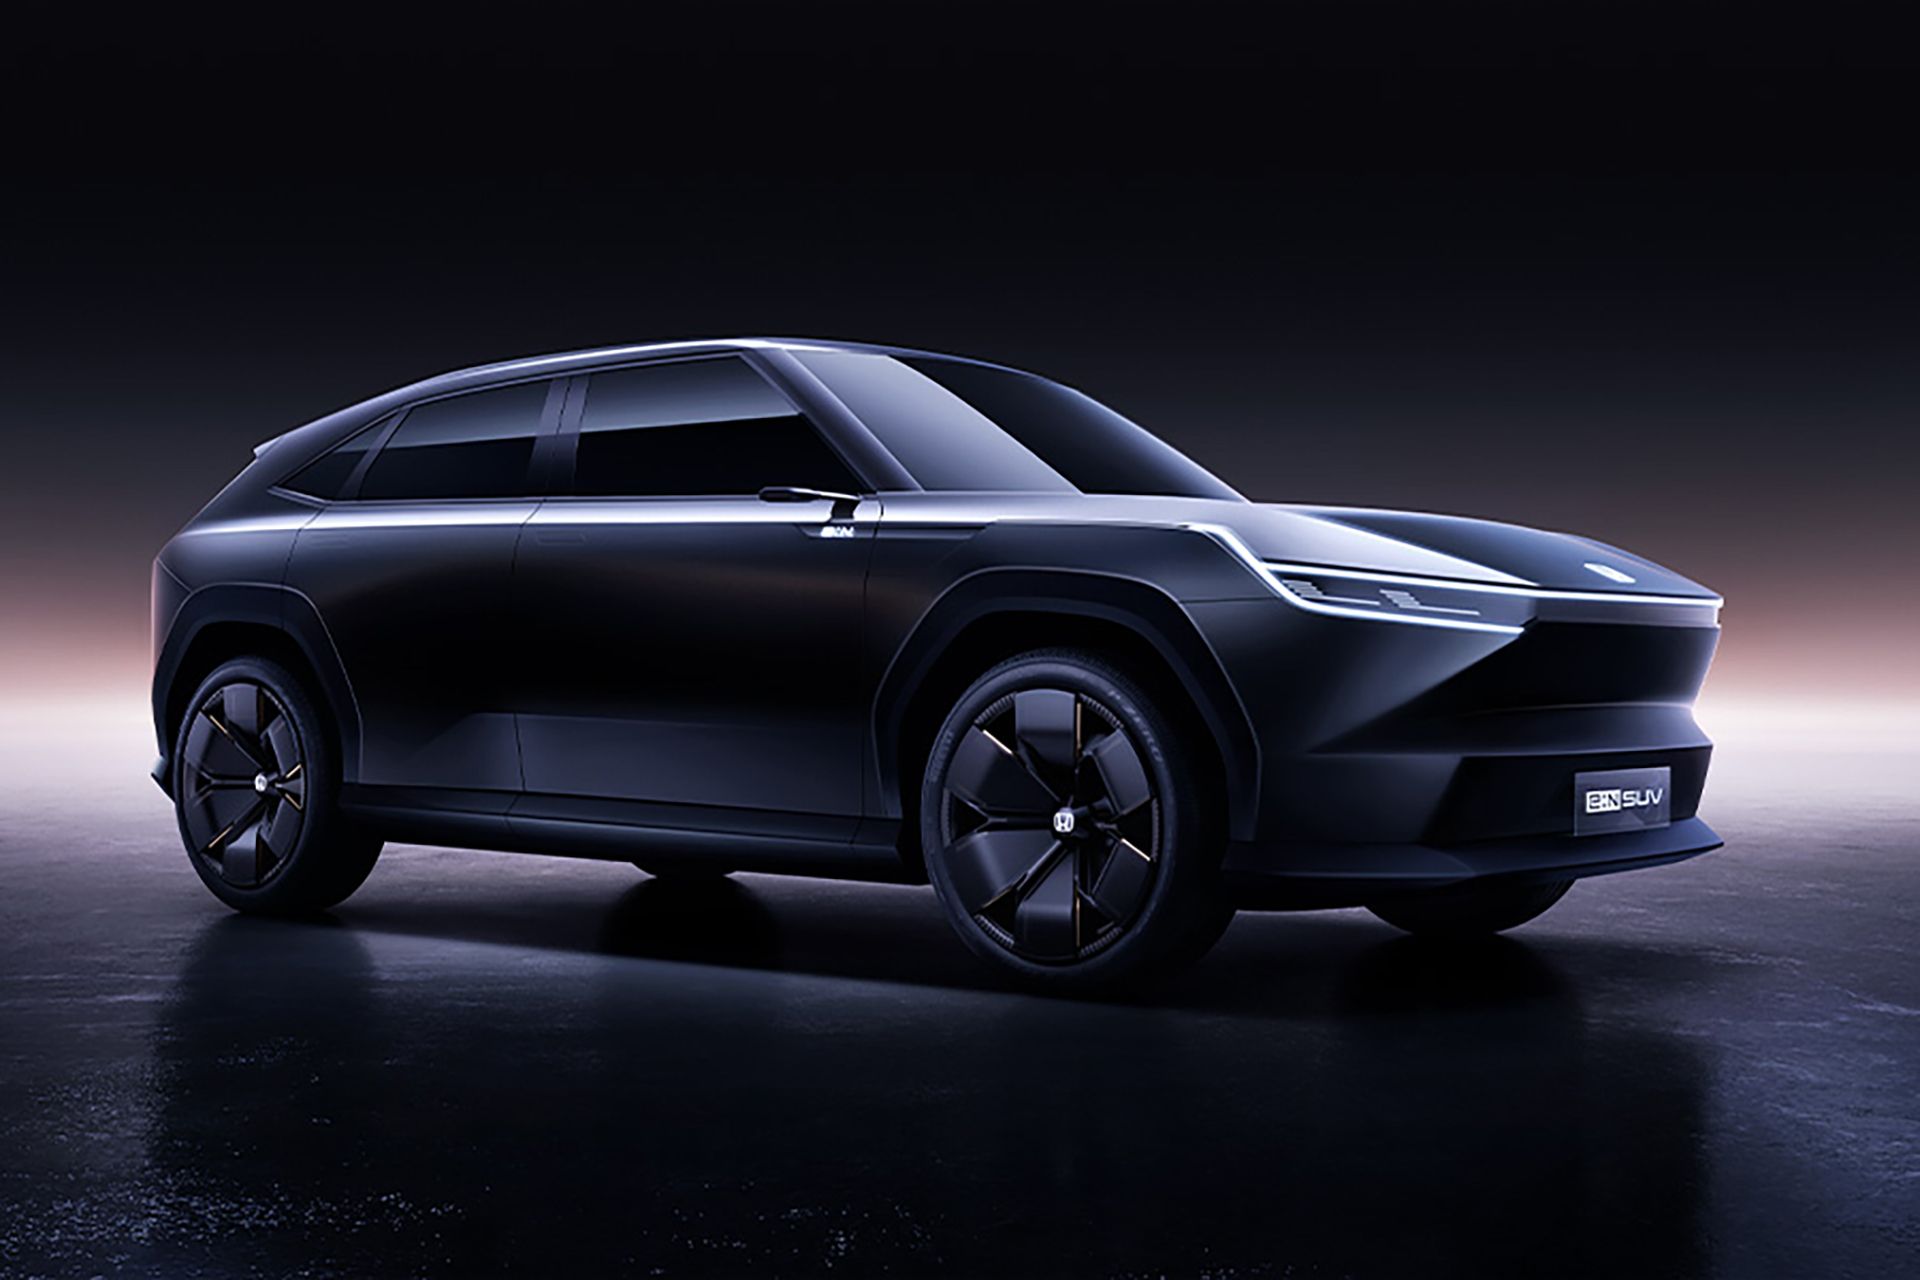 Honda launching mid- to large-size EV on own platform in 2025